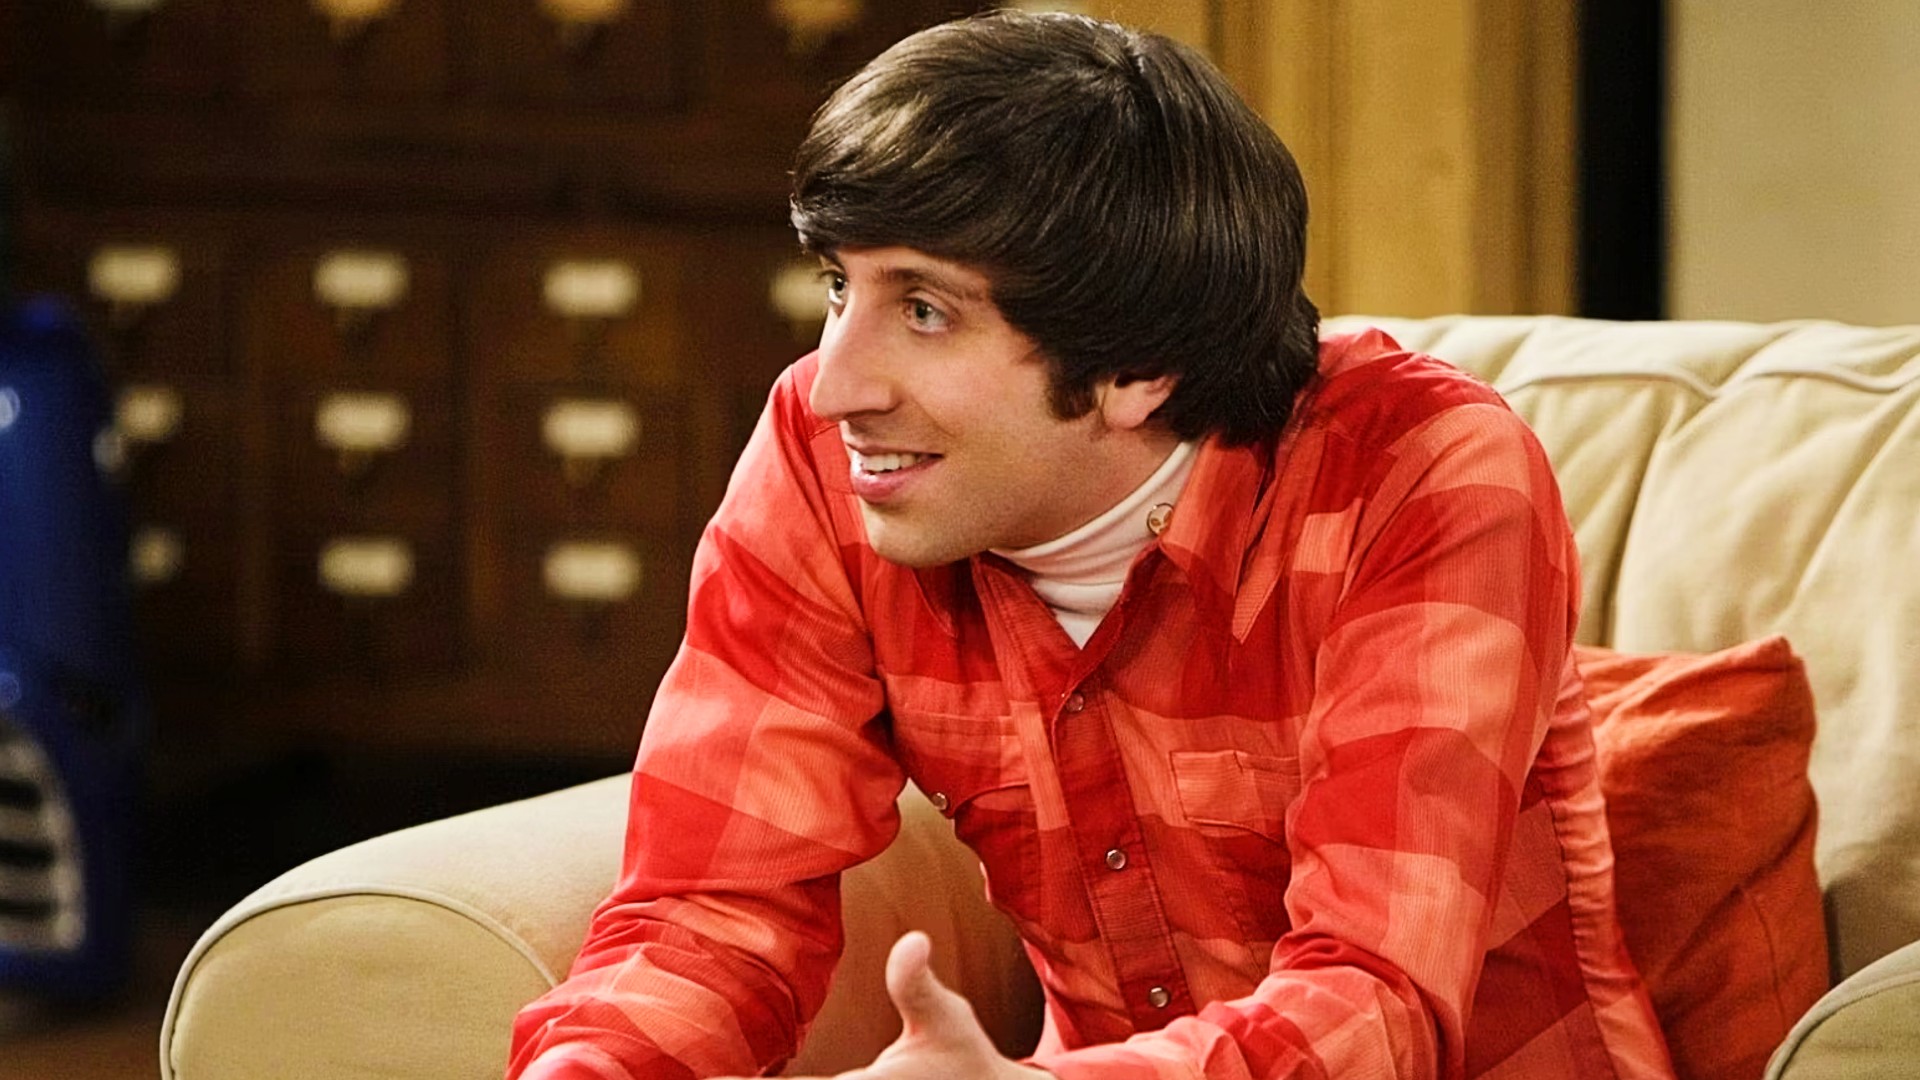 Simon Helberg as Howard Wolowitz wearing a red plaid polo